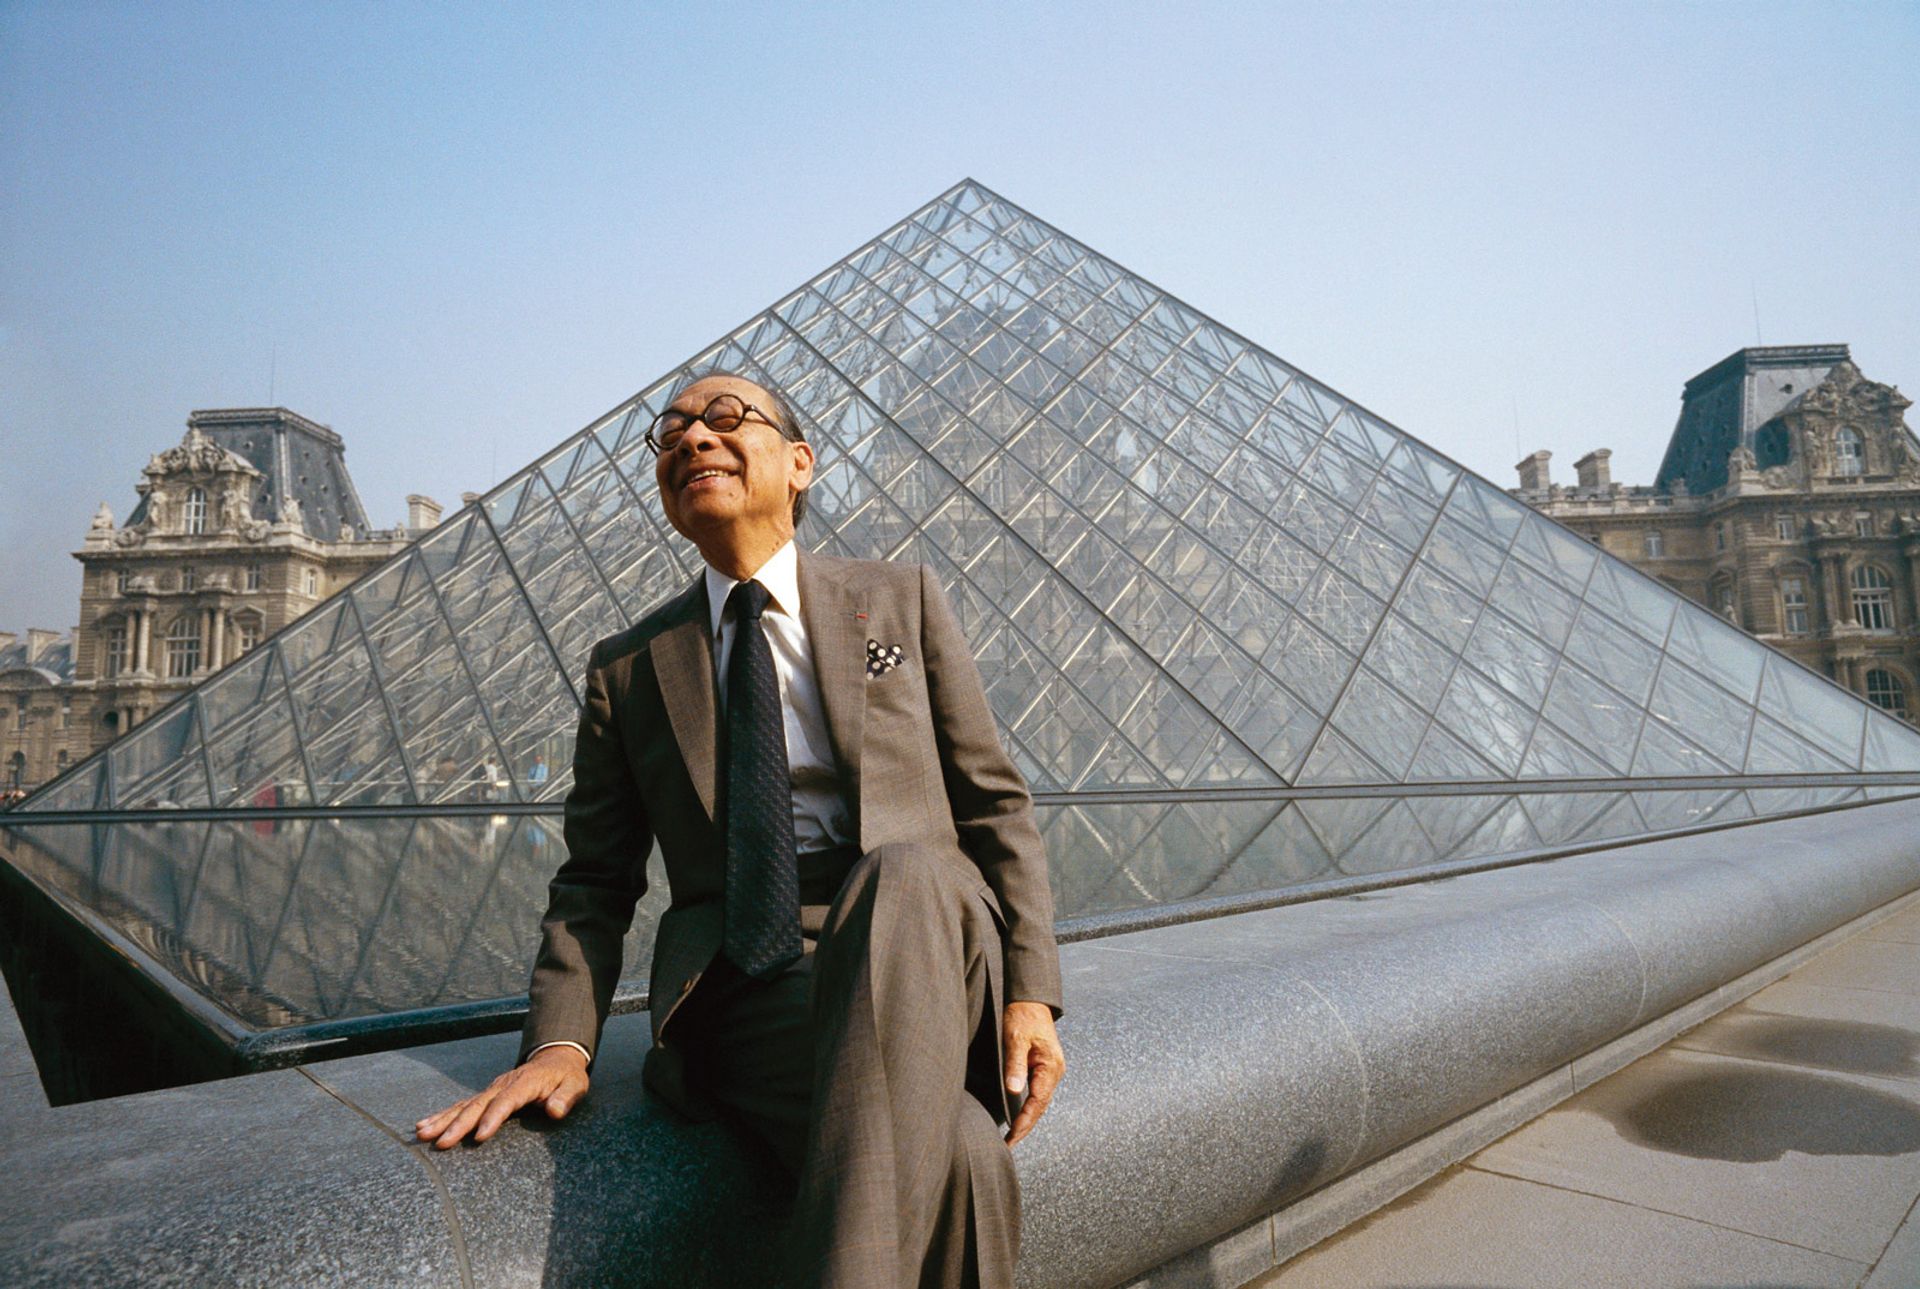 Despite early condemnation by critics, the Louvre’s monumental glass pyramid, designed by the Chinese-American architect  I.M. Pei (above), is credited with helping to boost visitor numbers from 3.5 million in 1989 to more than 10 million last year. © Bernard Bisson/Sygma/Getty Images